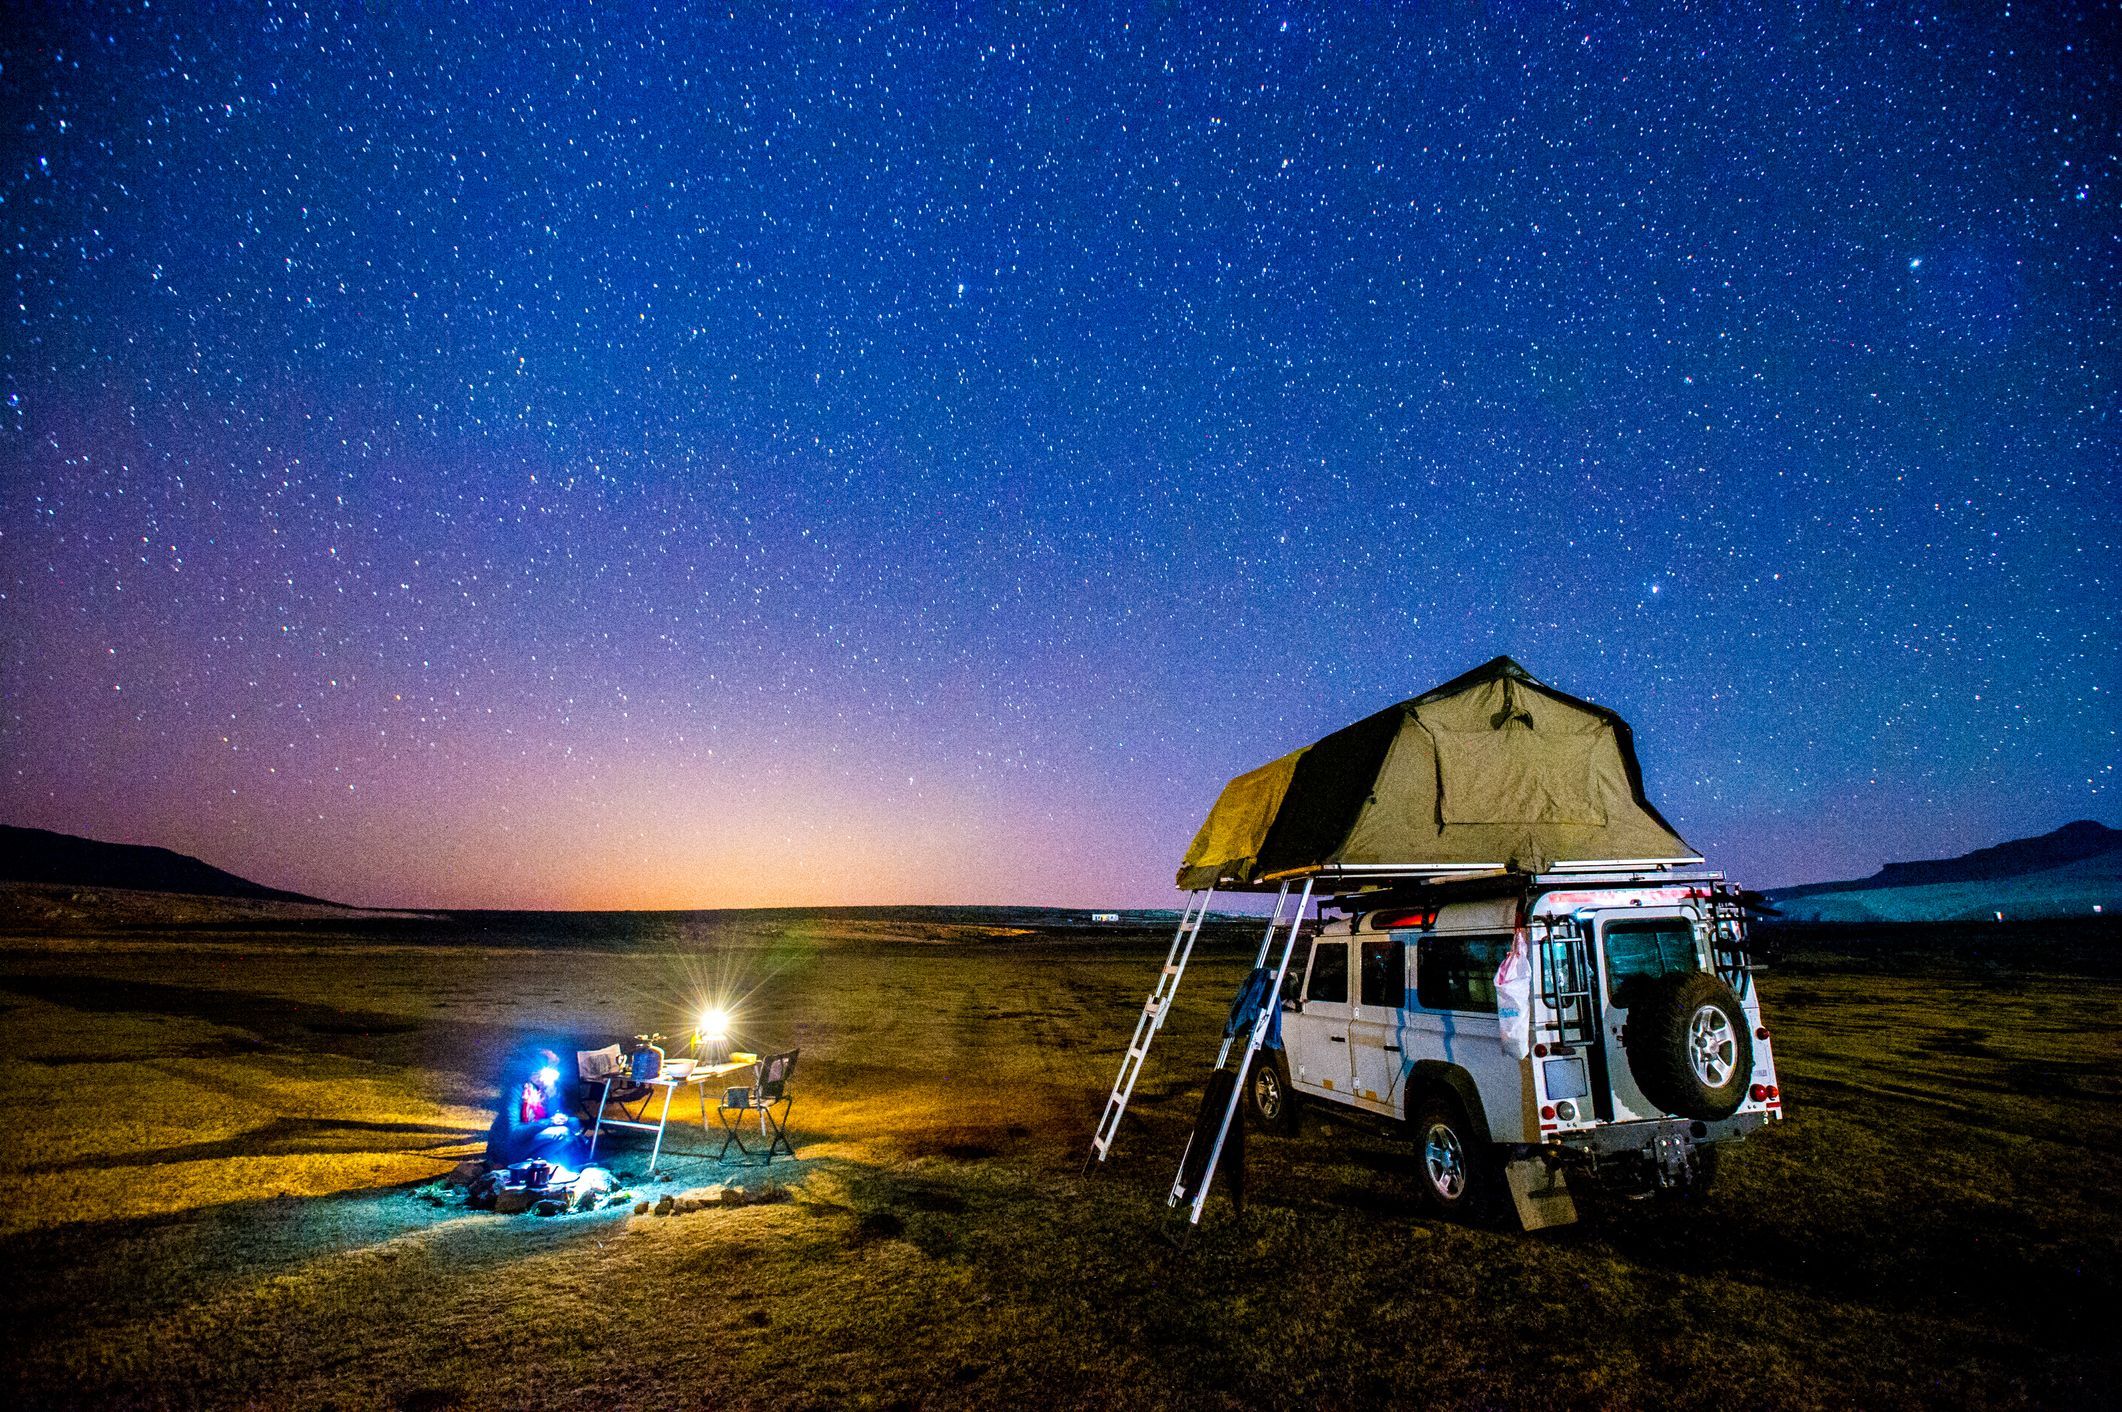 Best, Most Beautiful Campsites in the World to Visit Right Now